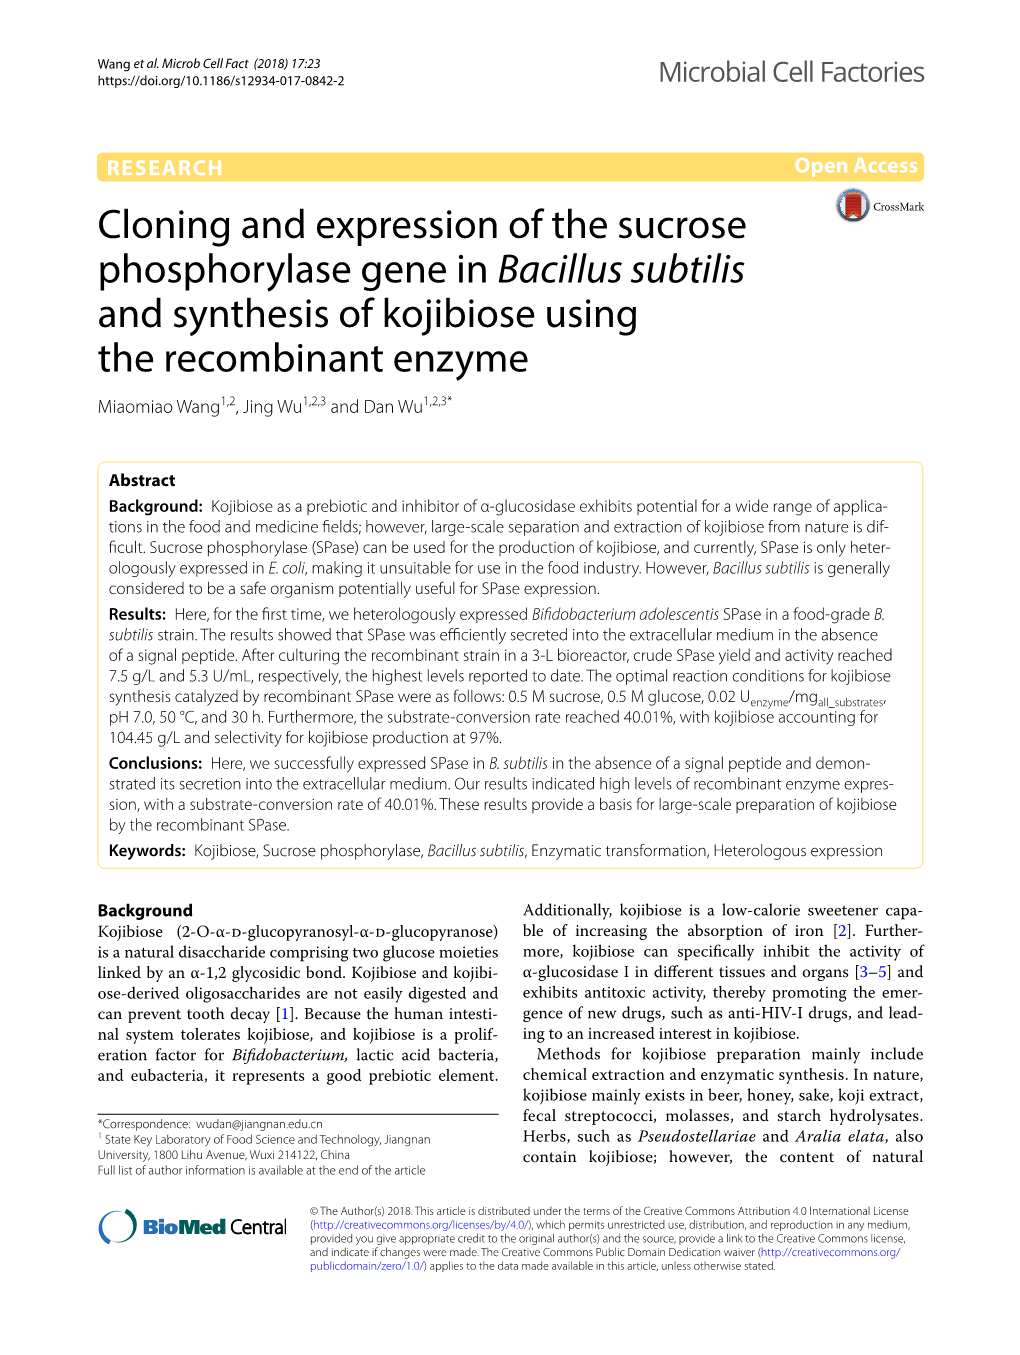 Cloning and Expression of the Sucrose Phosphorylase Gene in Bacillus